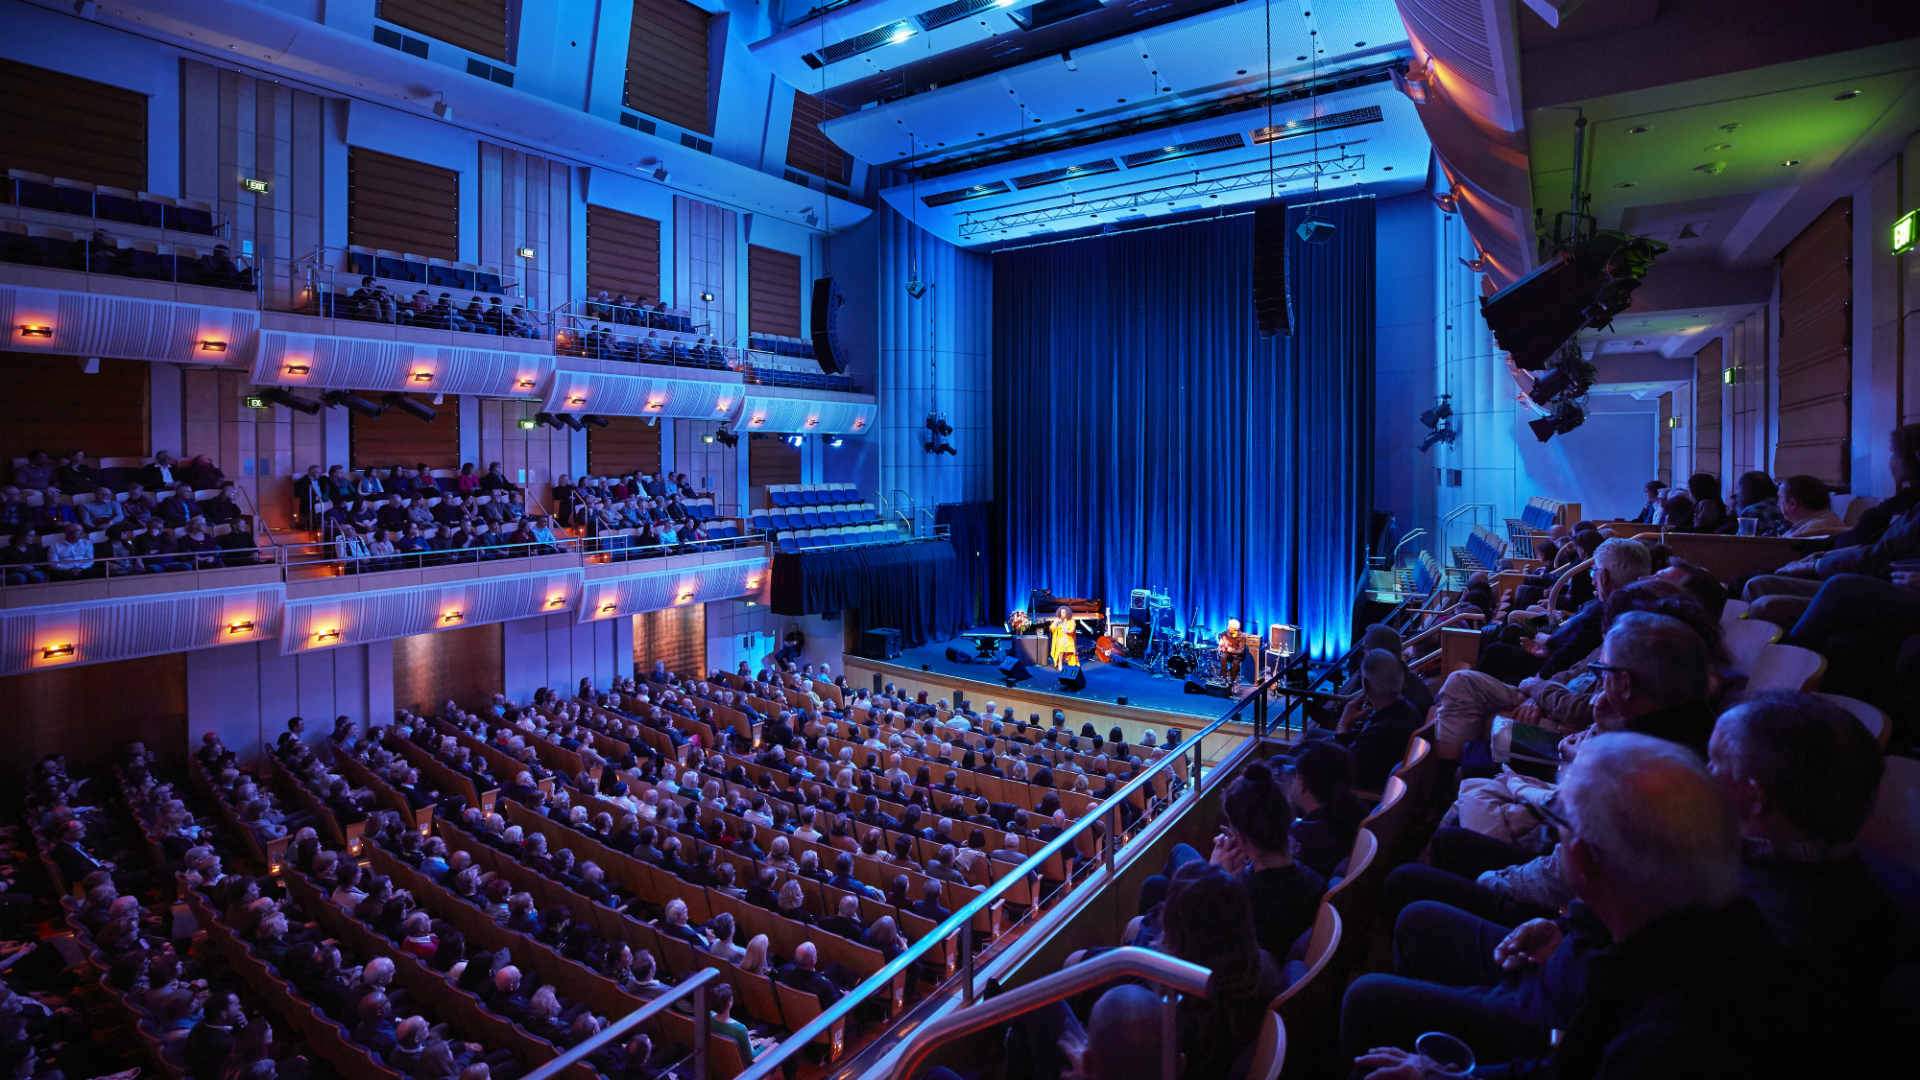 The City Recital Hall Has Announced Its June Program Featuring Legends The Pharcyde and Asgeir